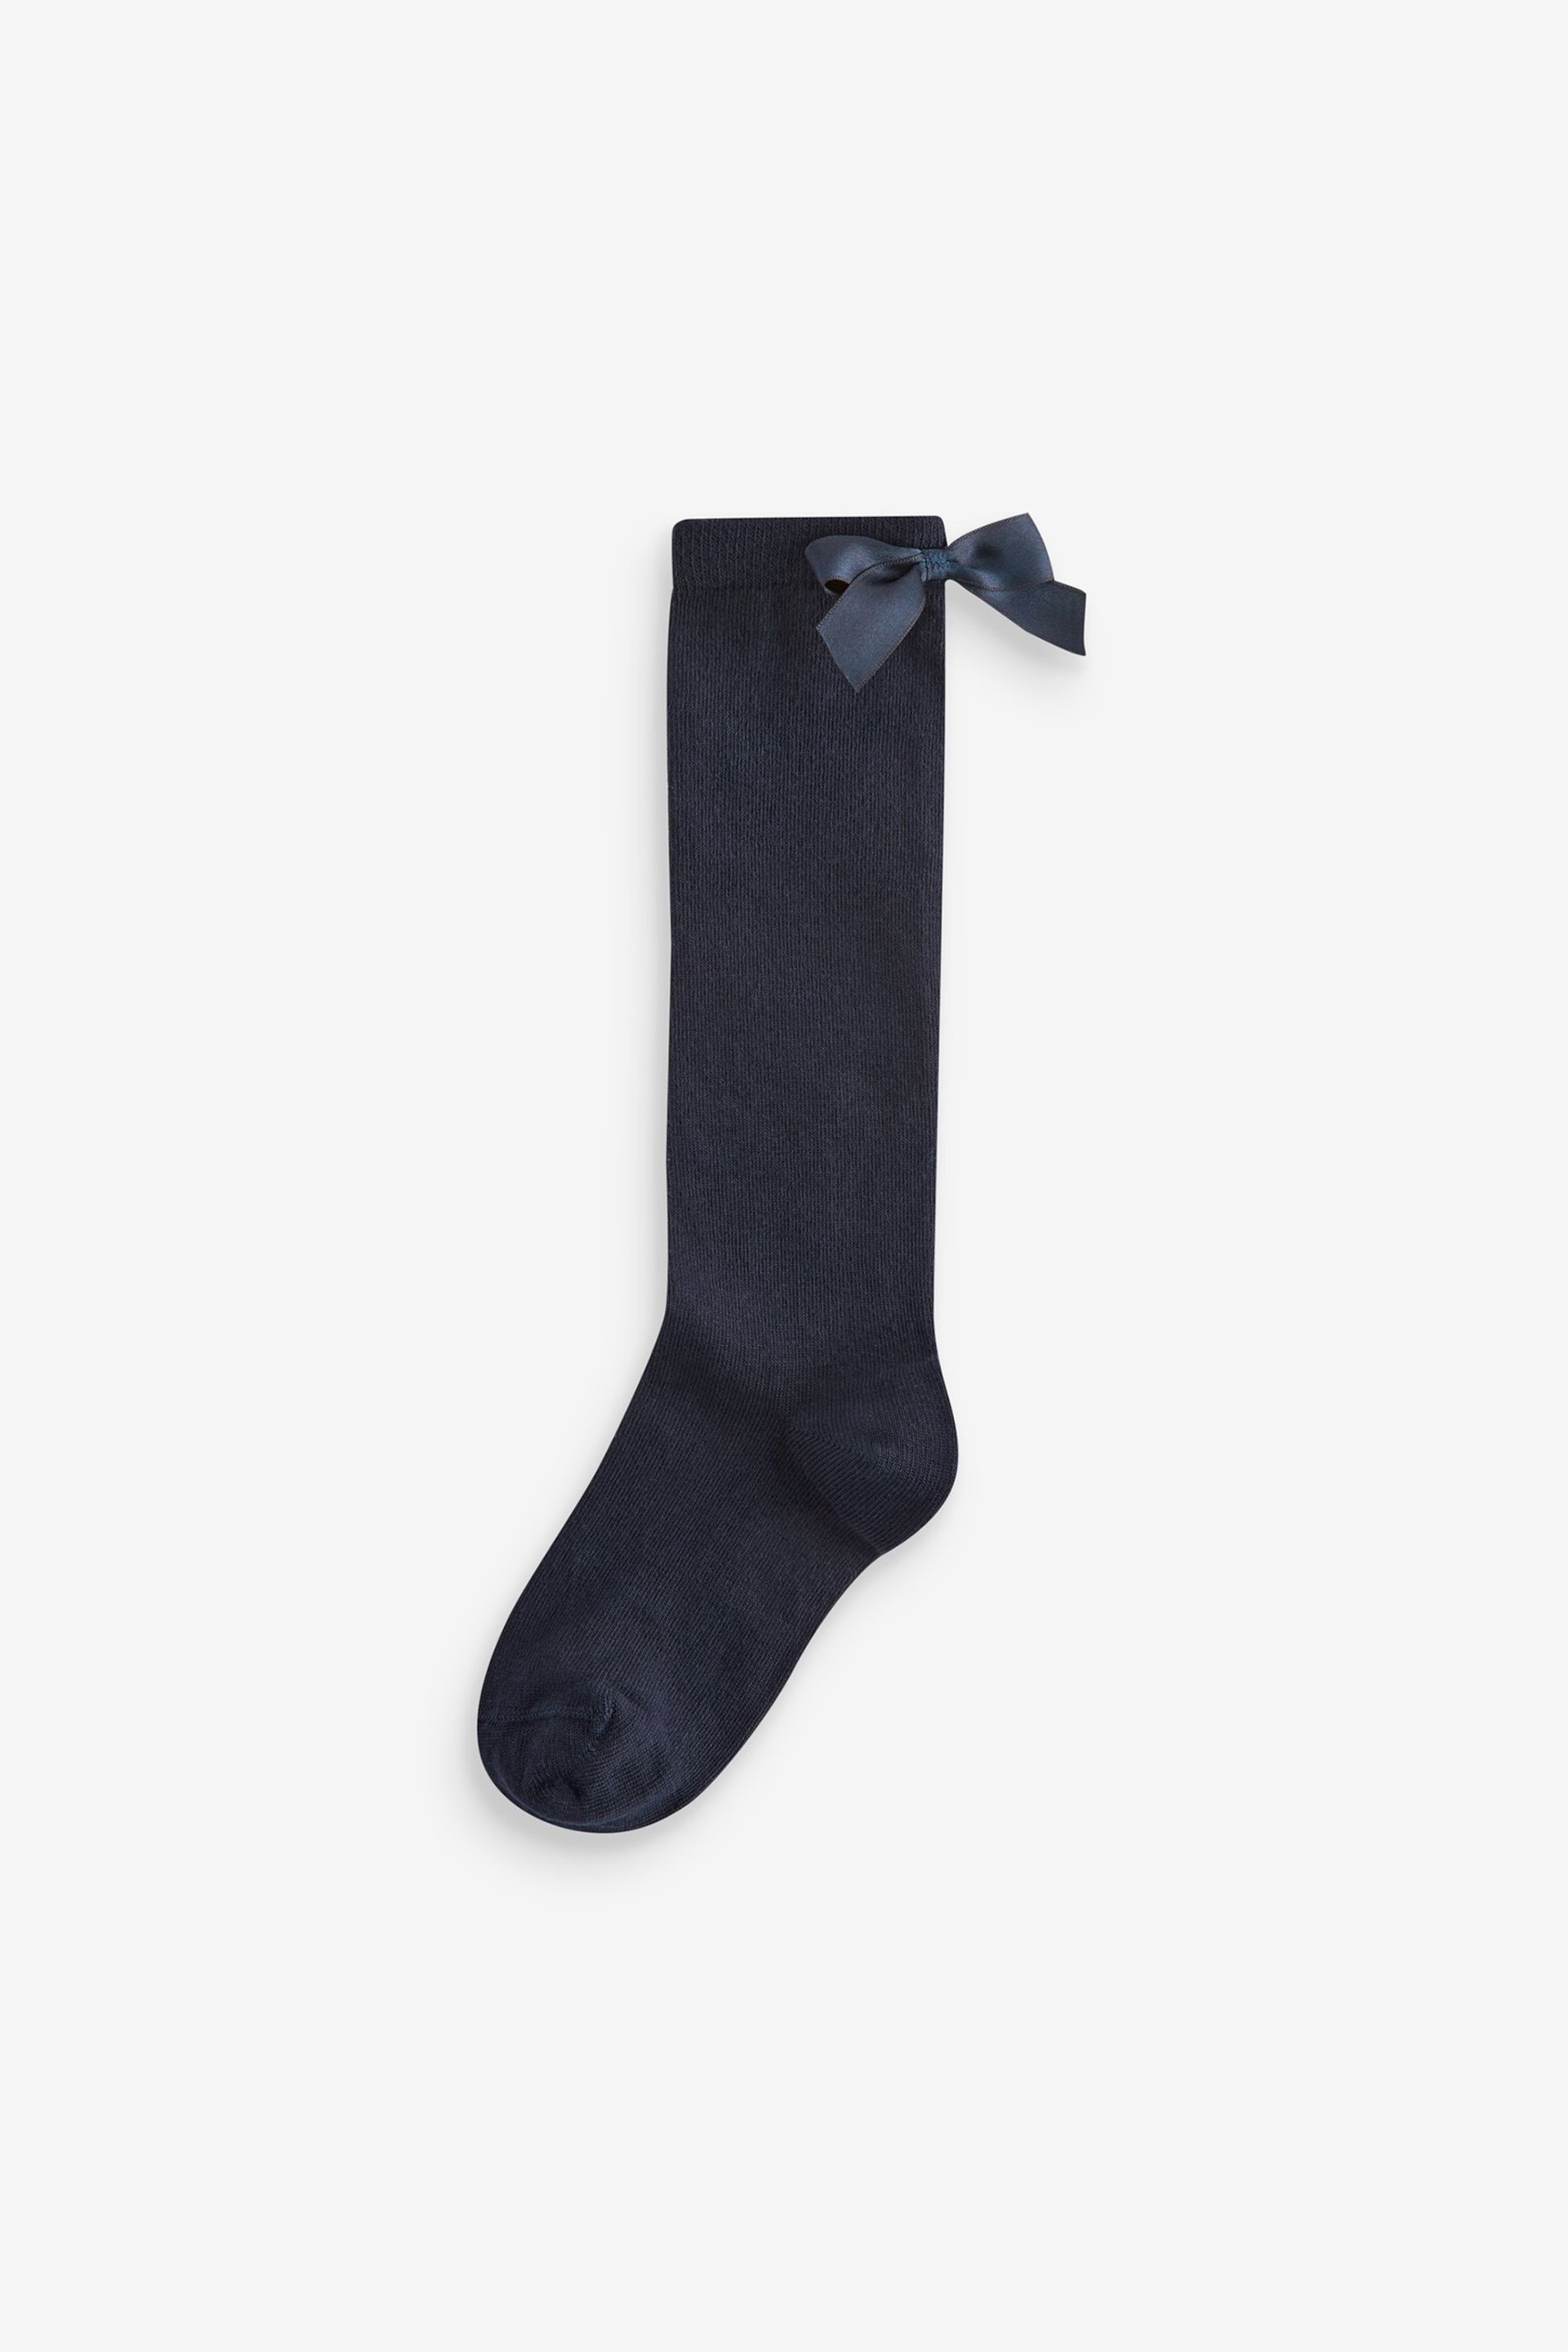 Navy Blue Cotton Rich Bow Knee High School Socks 2 Pack - Image 3 of 3